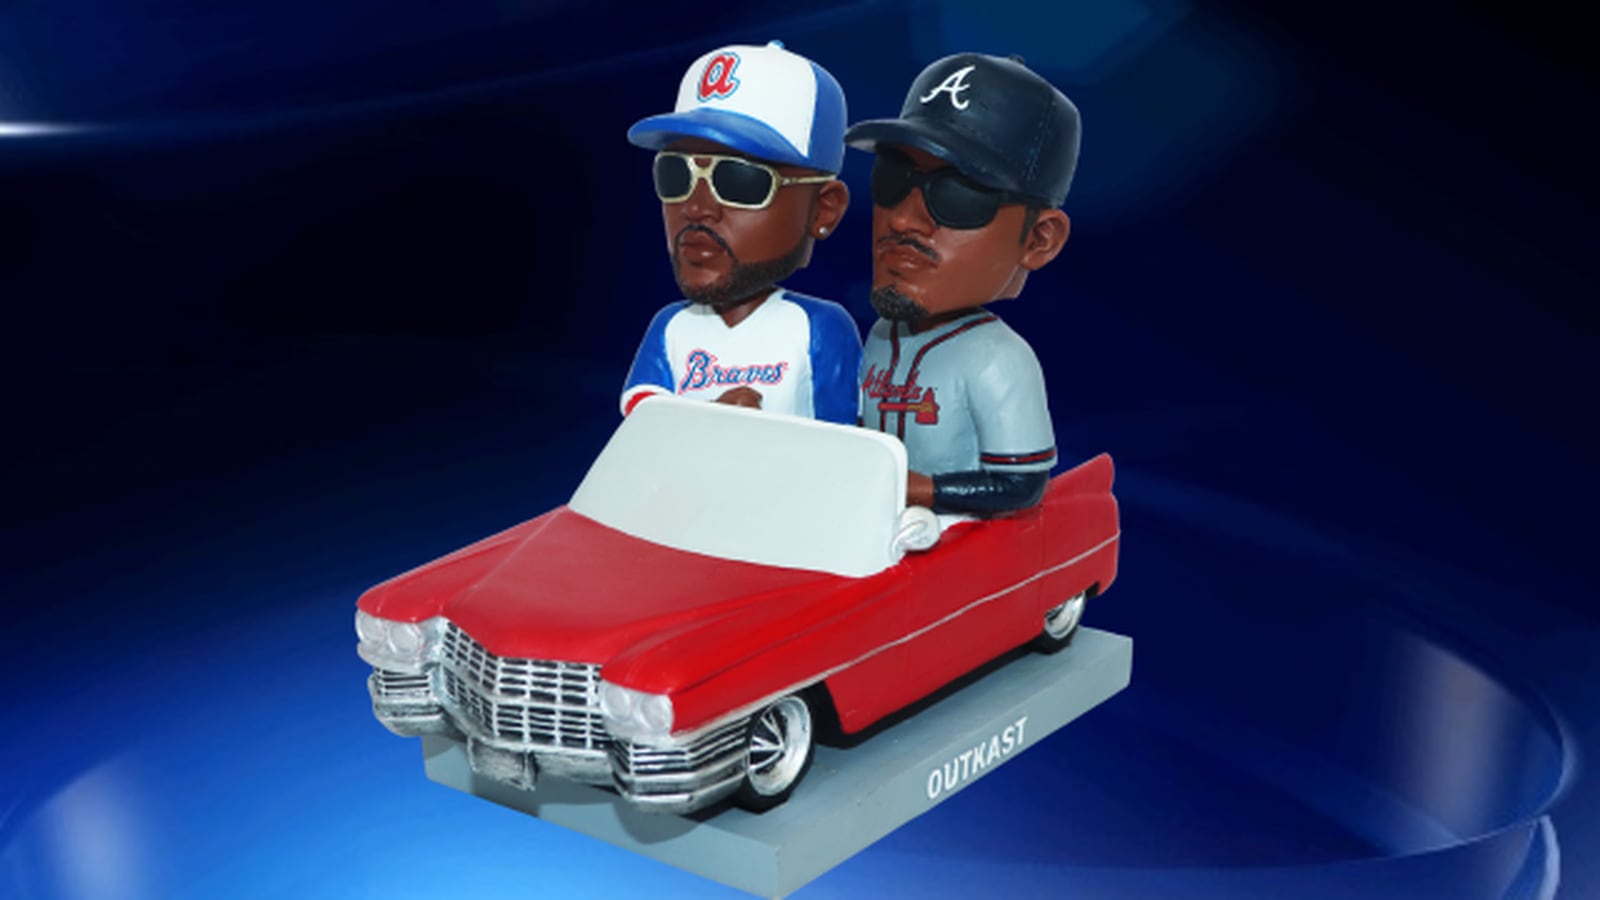 Iconic hip hop duo OutKast to be honored at Braves game with bobblehead